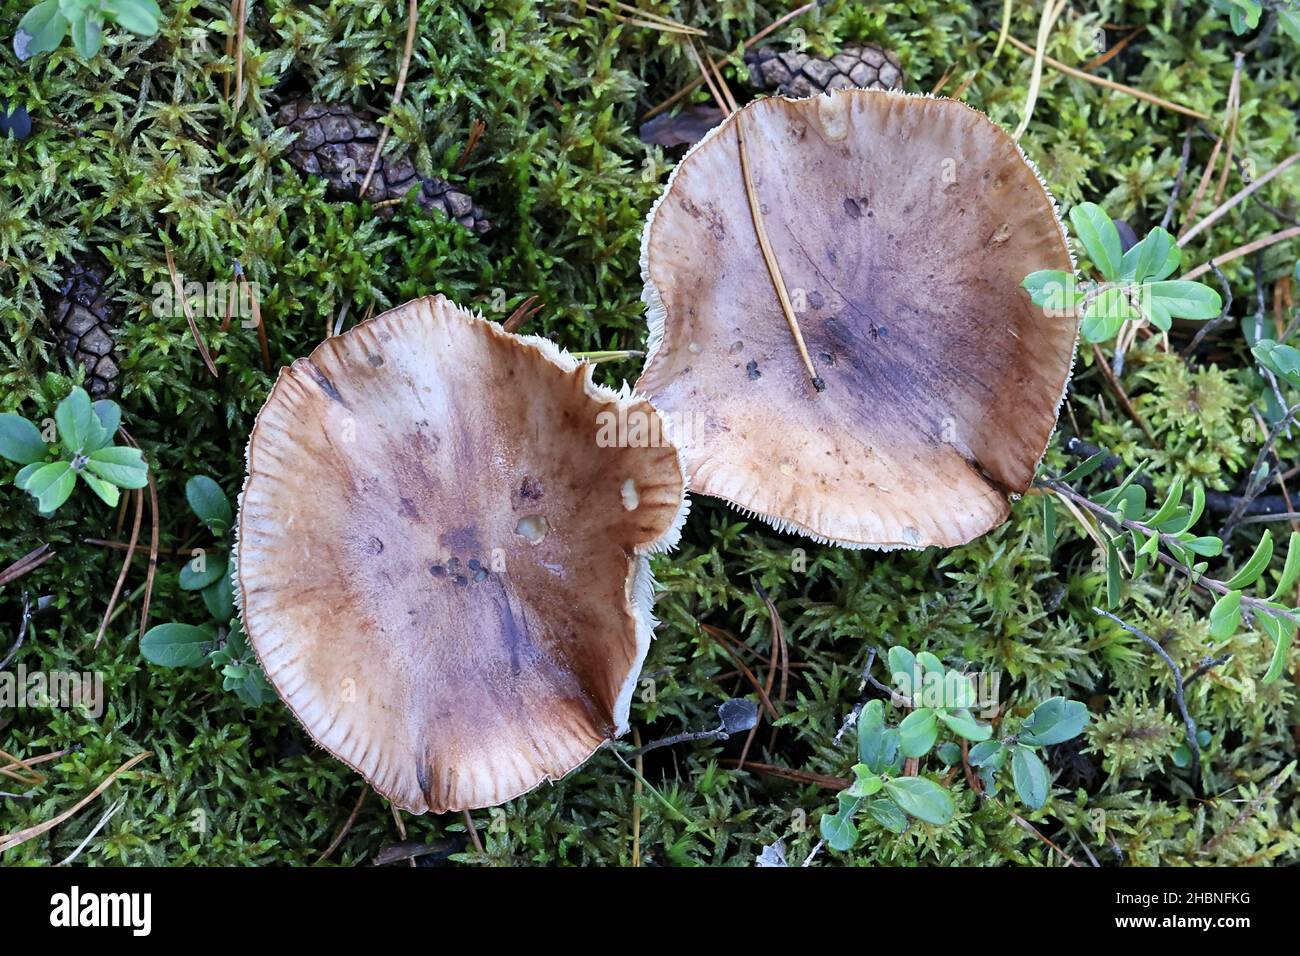 Tricholoma stans, known as Upright Knight, wild mushroom from Finland Stock Photo